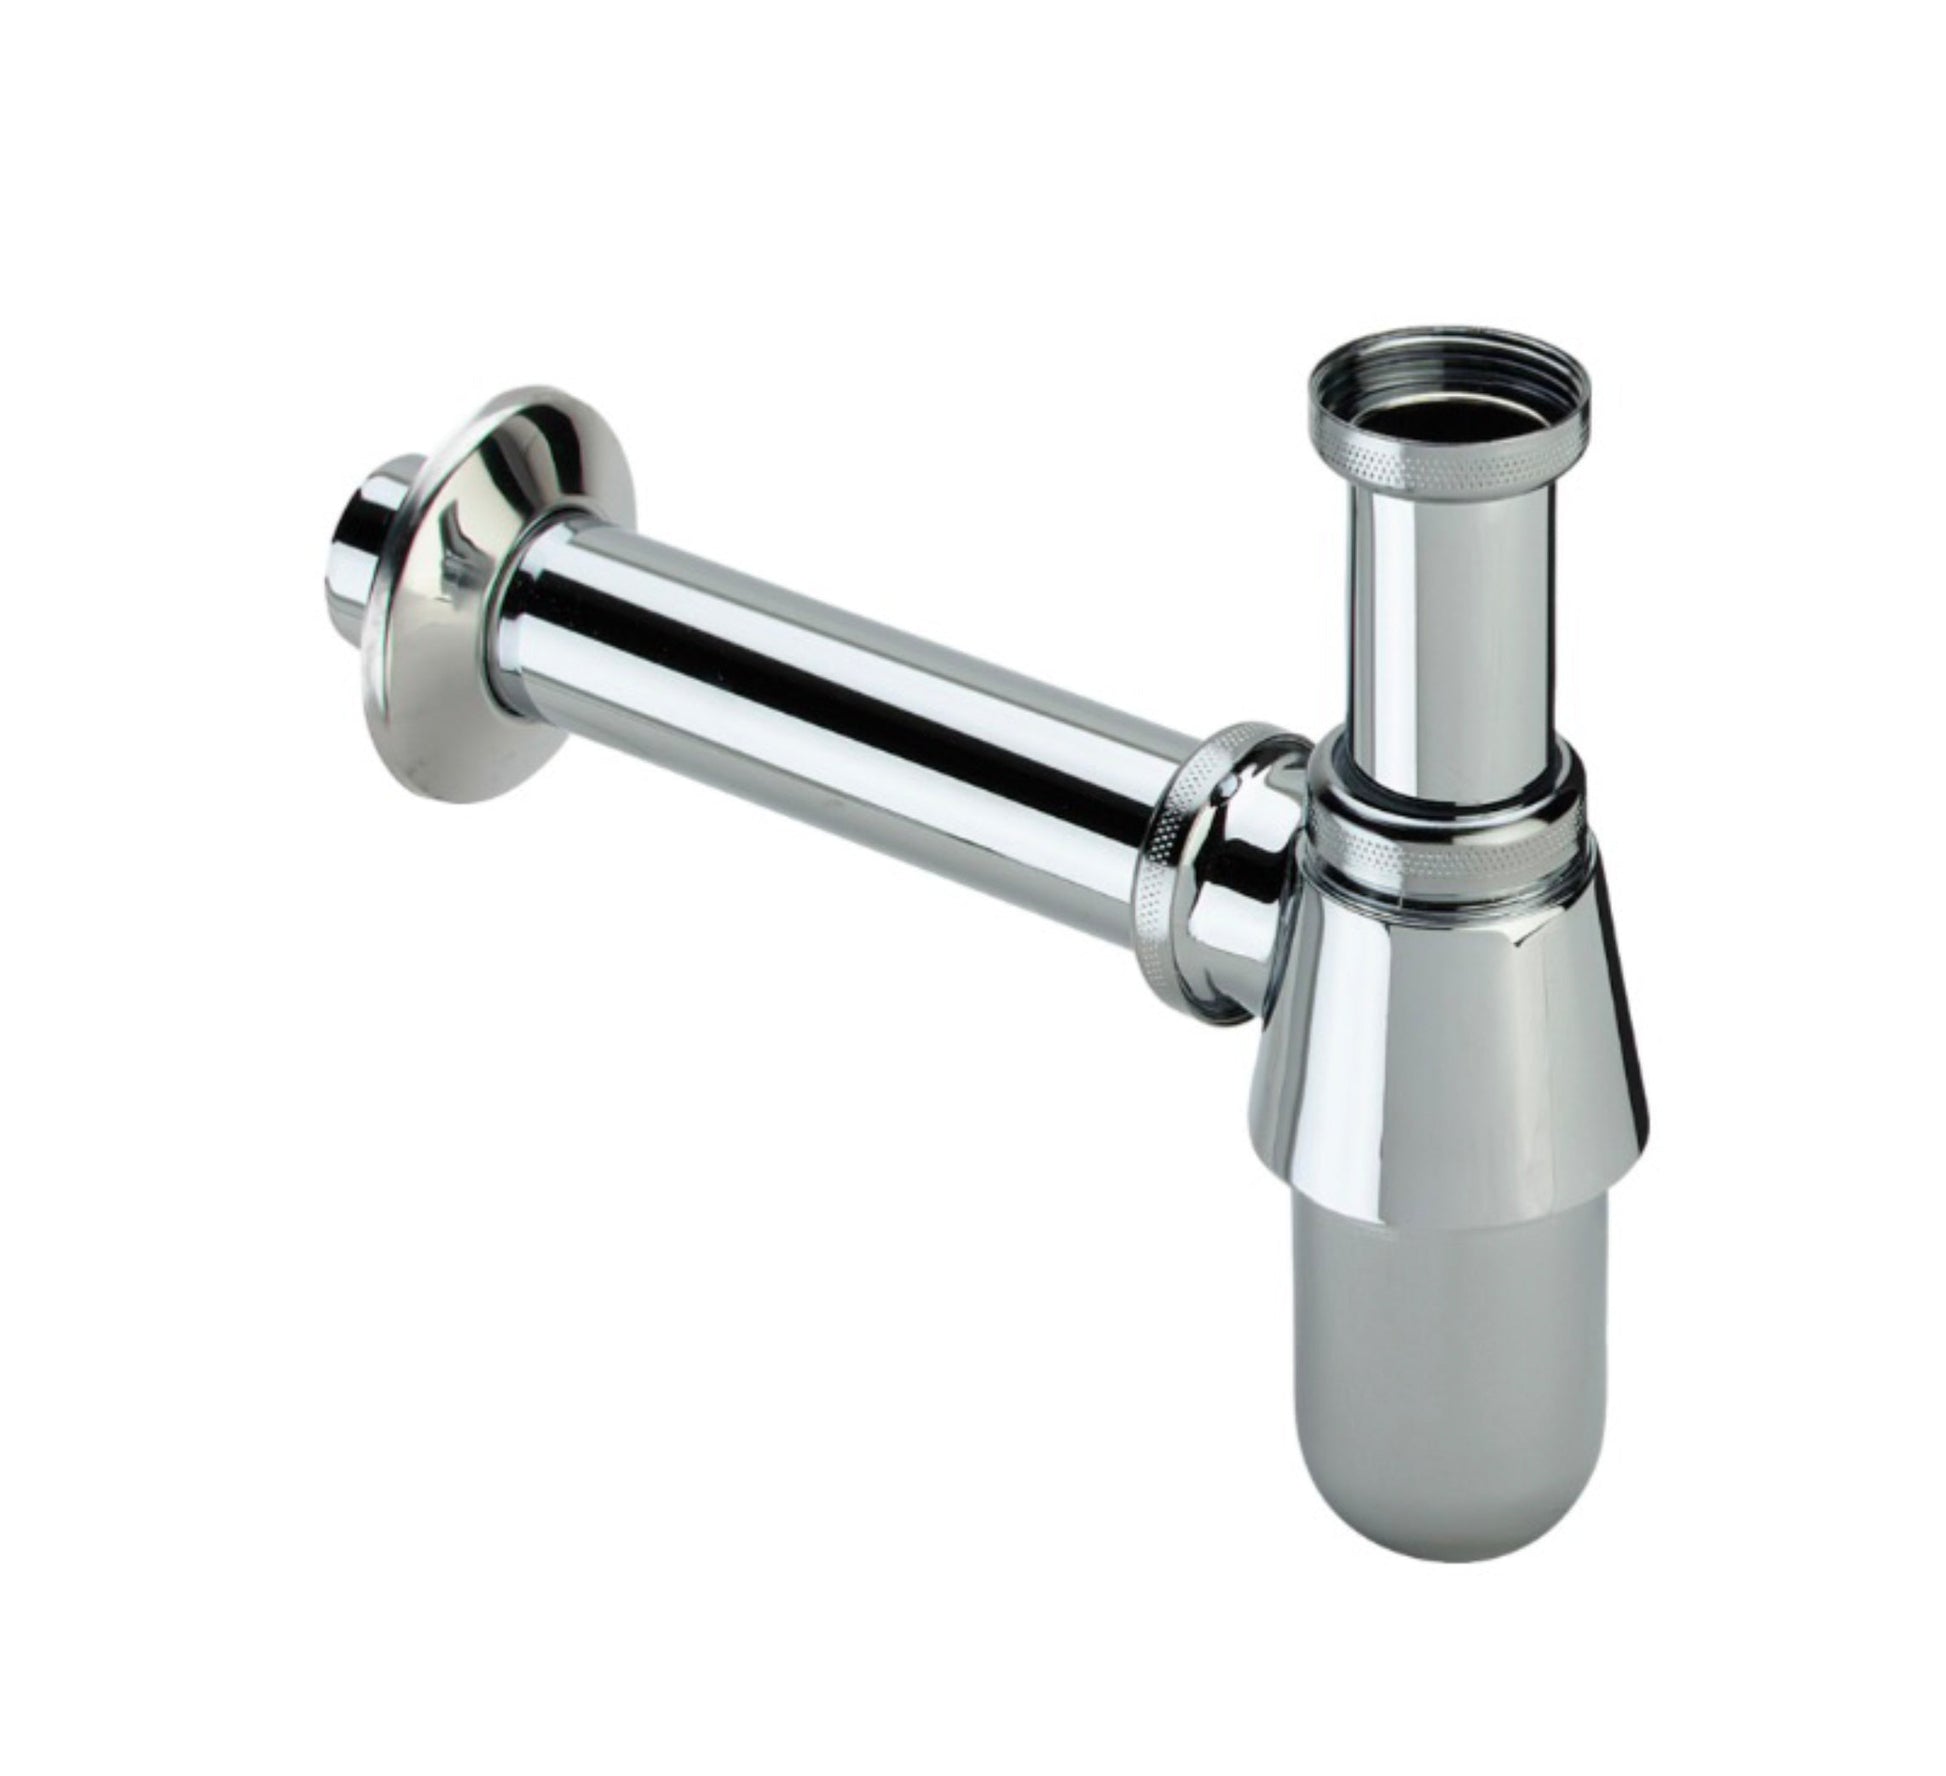 VIEGA WASTE FITTINGS BOTTLE TRAP FOR WASHBASIN-REF.5753 1 1/4 CHROME PLATED